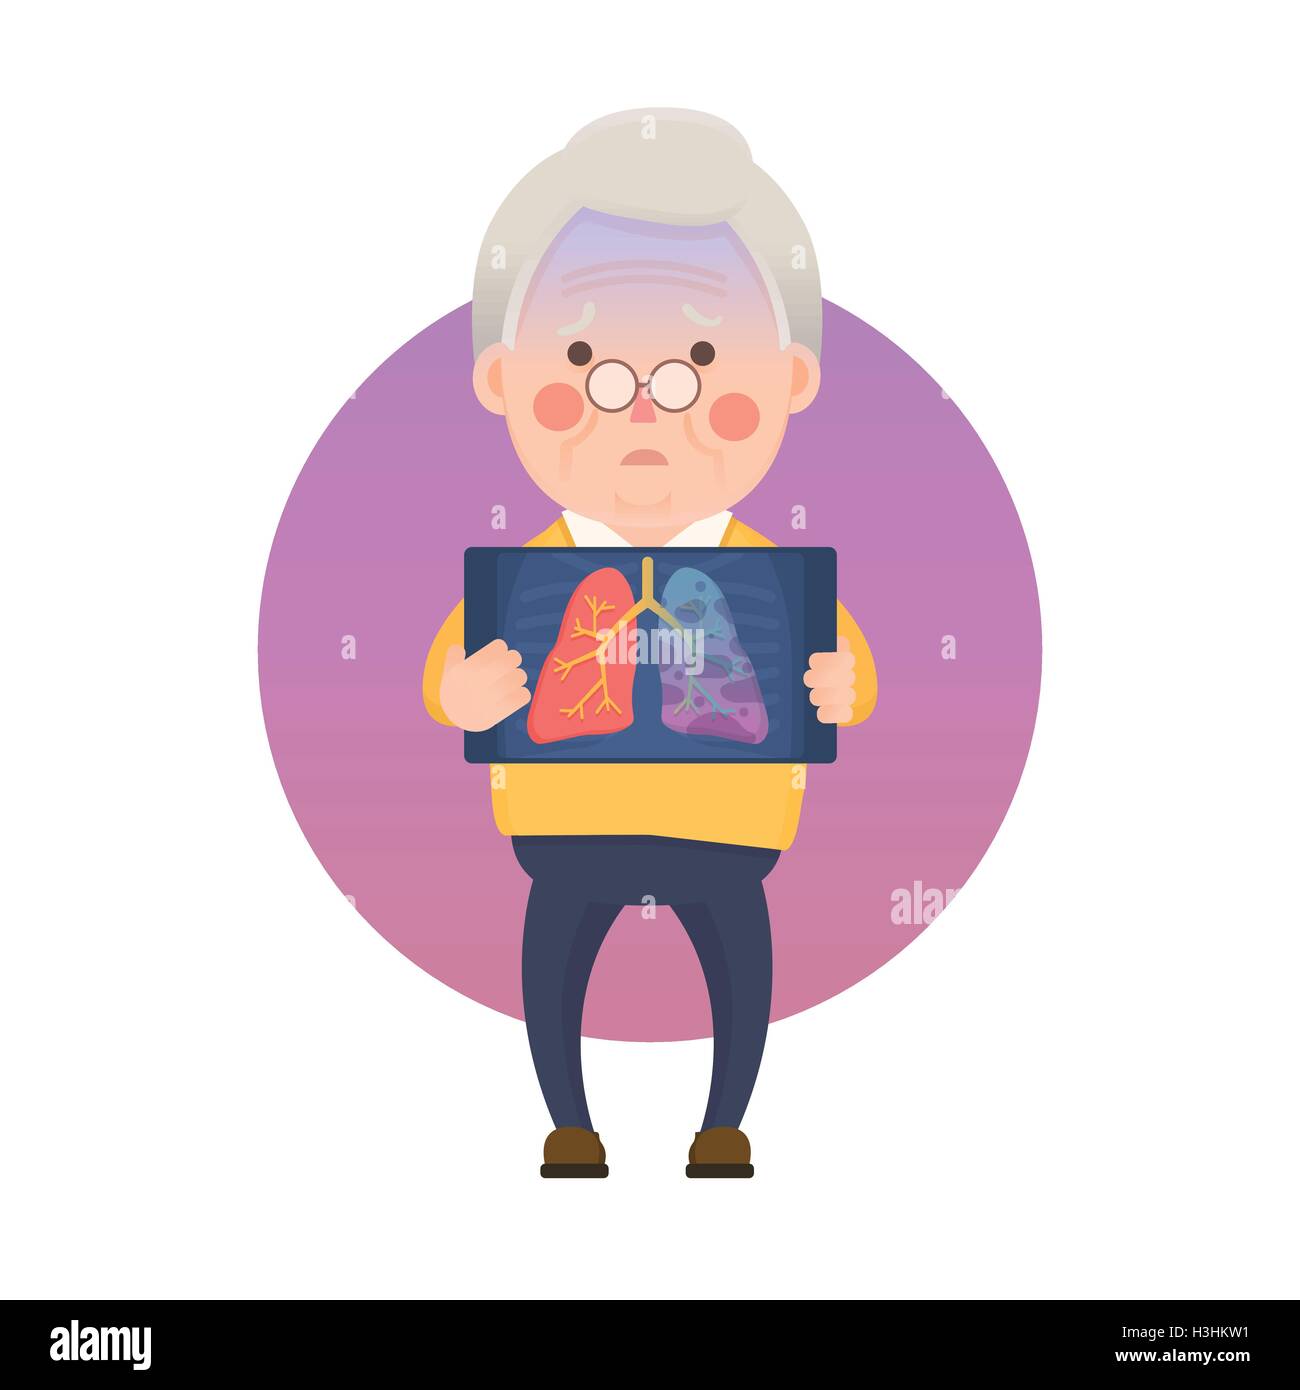 Vector Illustration of Old Man Holding X-ray Image Showing Lung Cancer Problem, Cartoon Character Stock Vector